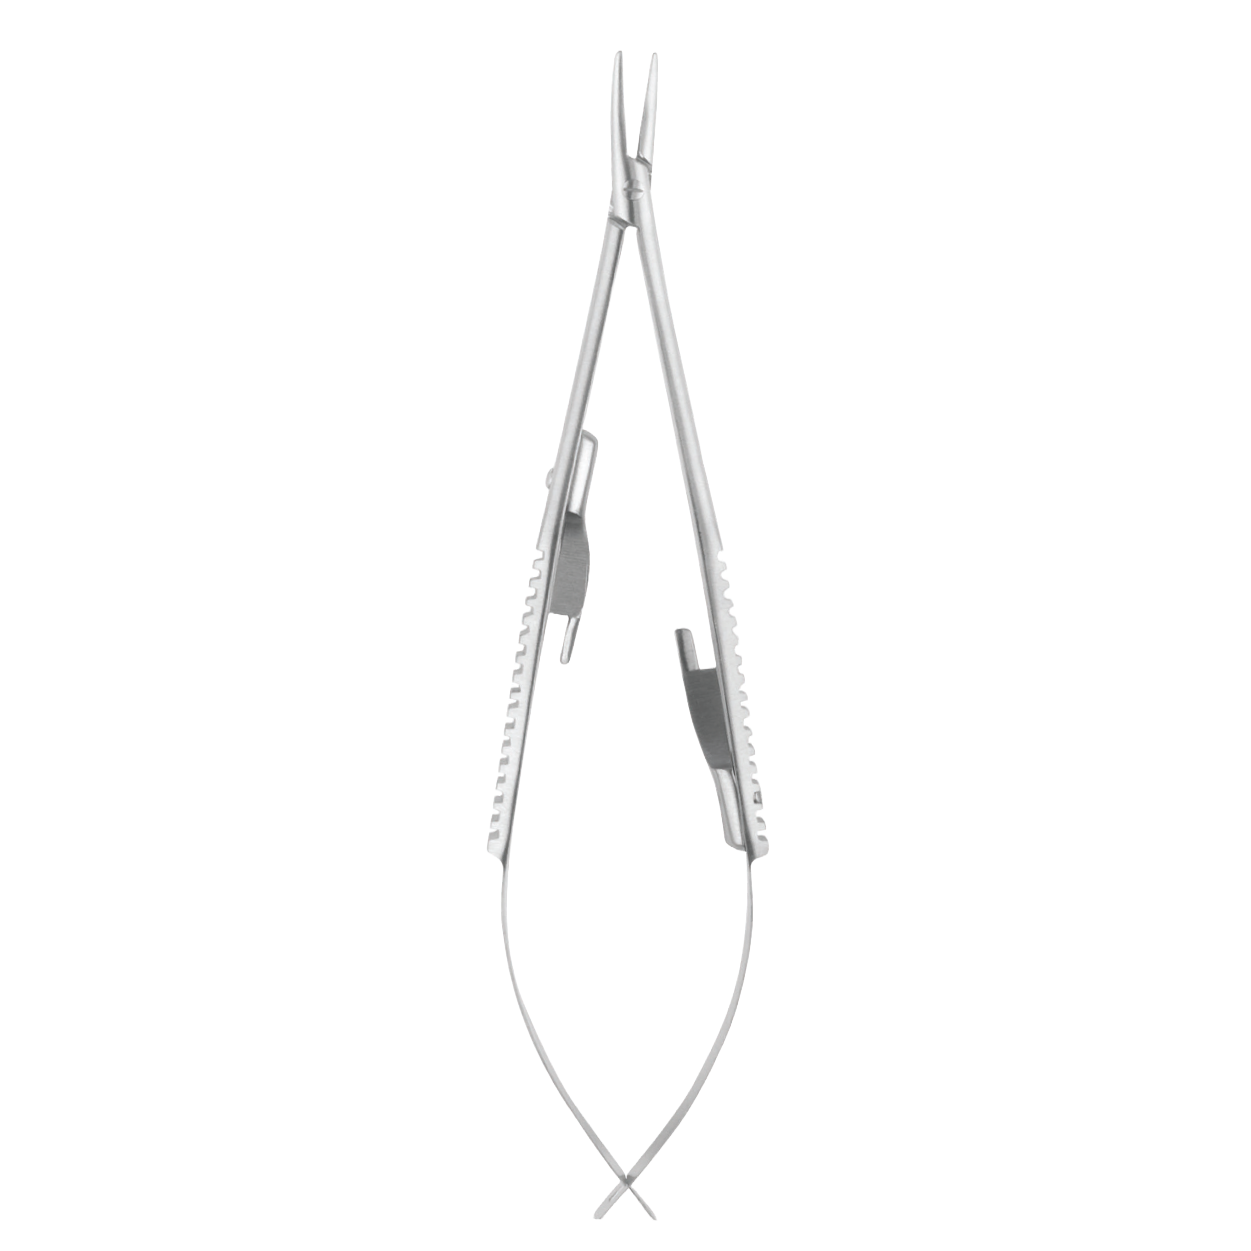 Castroviejo Needle Holder, Curved with Ratchet, 14cm (5.50")